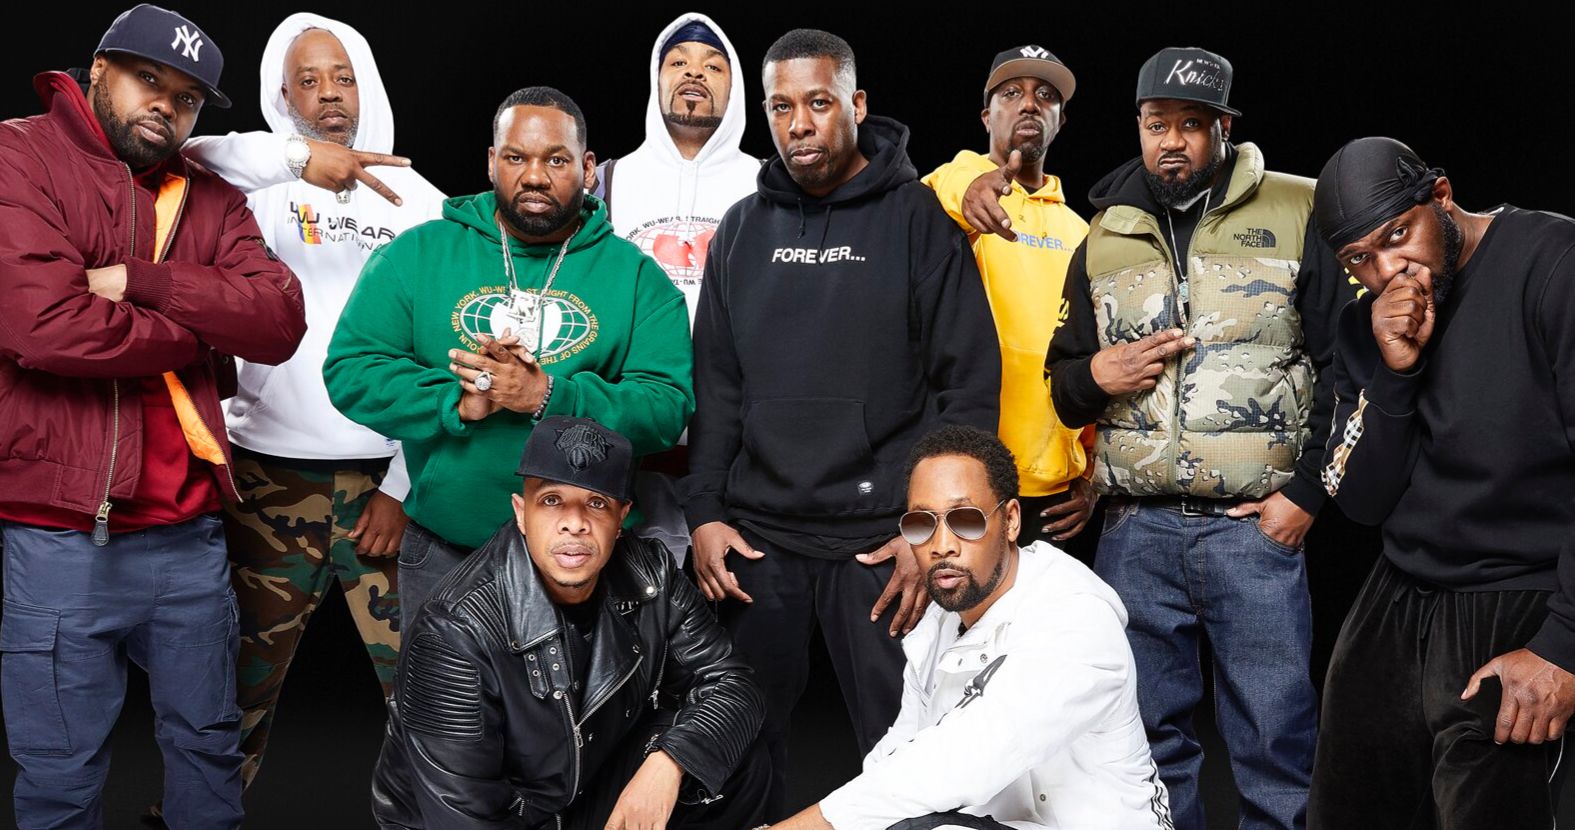 Wu-Tang Clan Drops Tips on How to Protect Ya Neck Against the Coronavirus